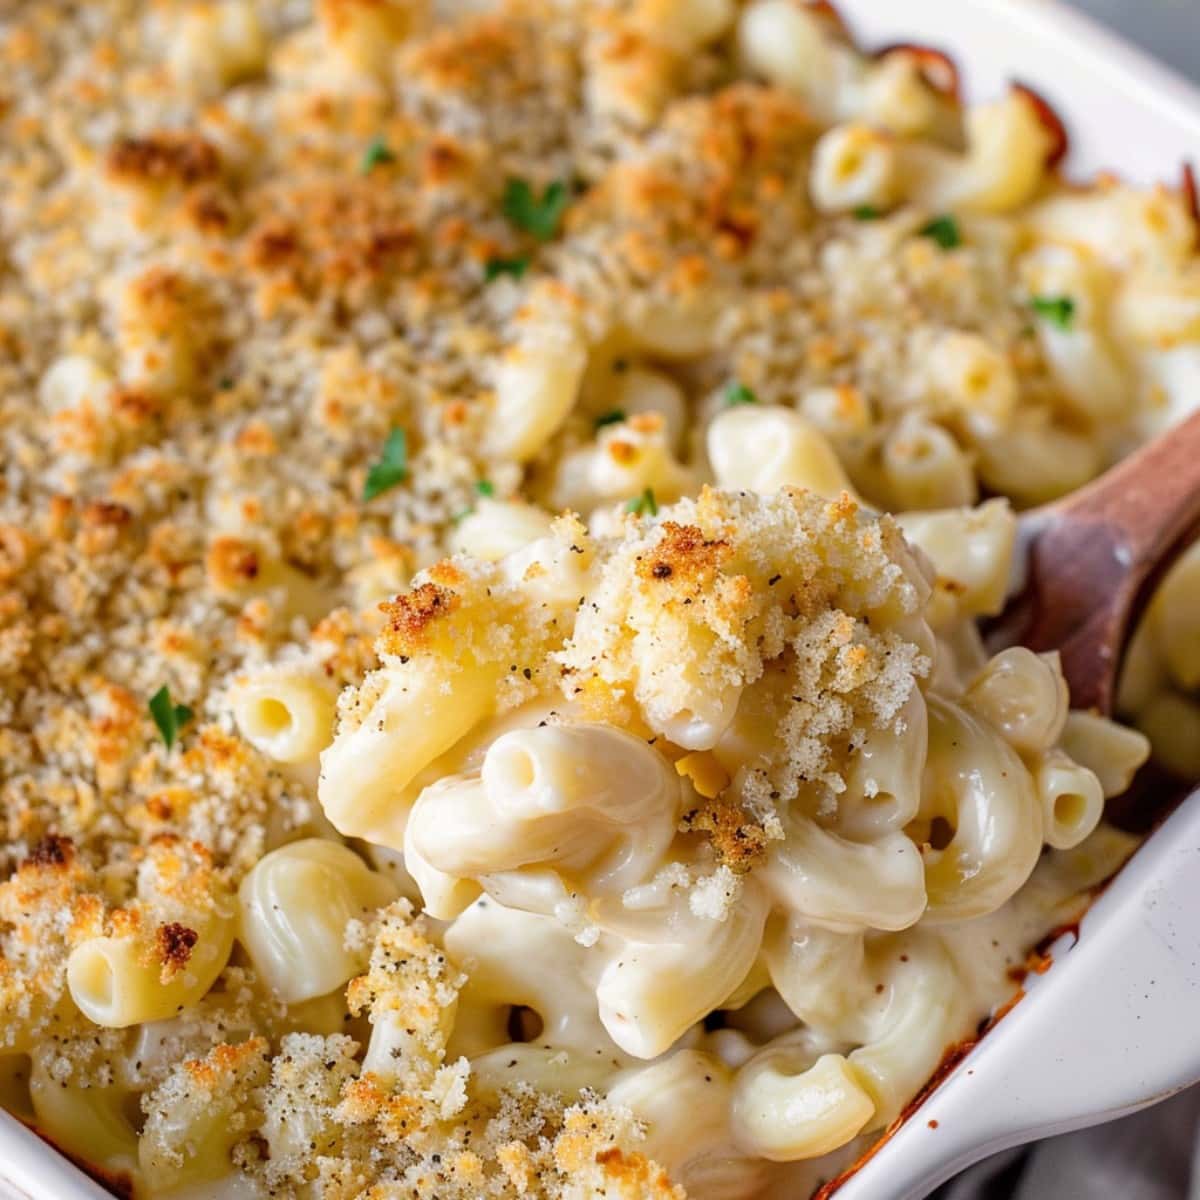 Creamy and cheesy homemade white cheddar mac and cheese in a white casserole